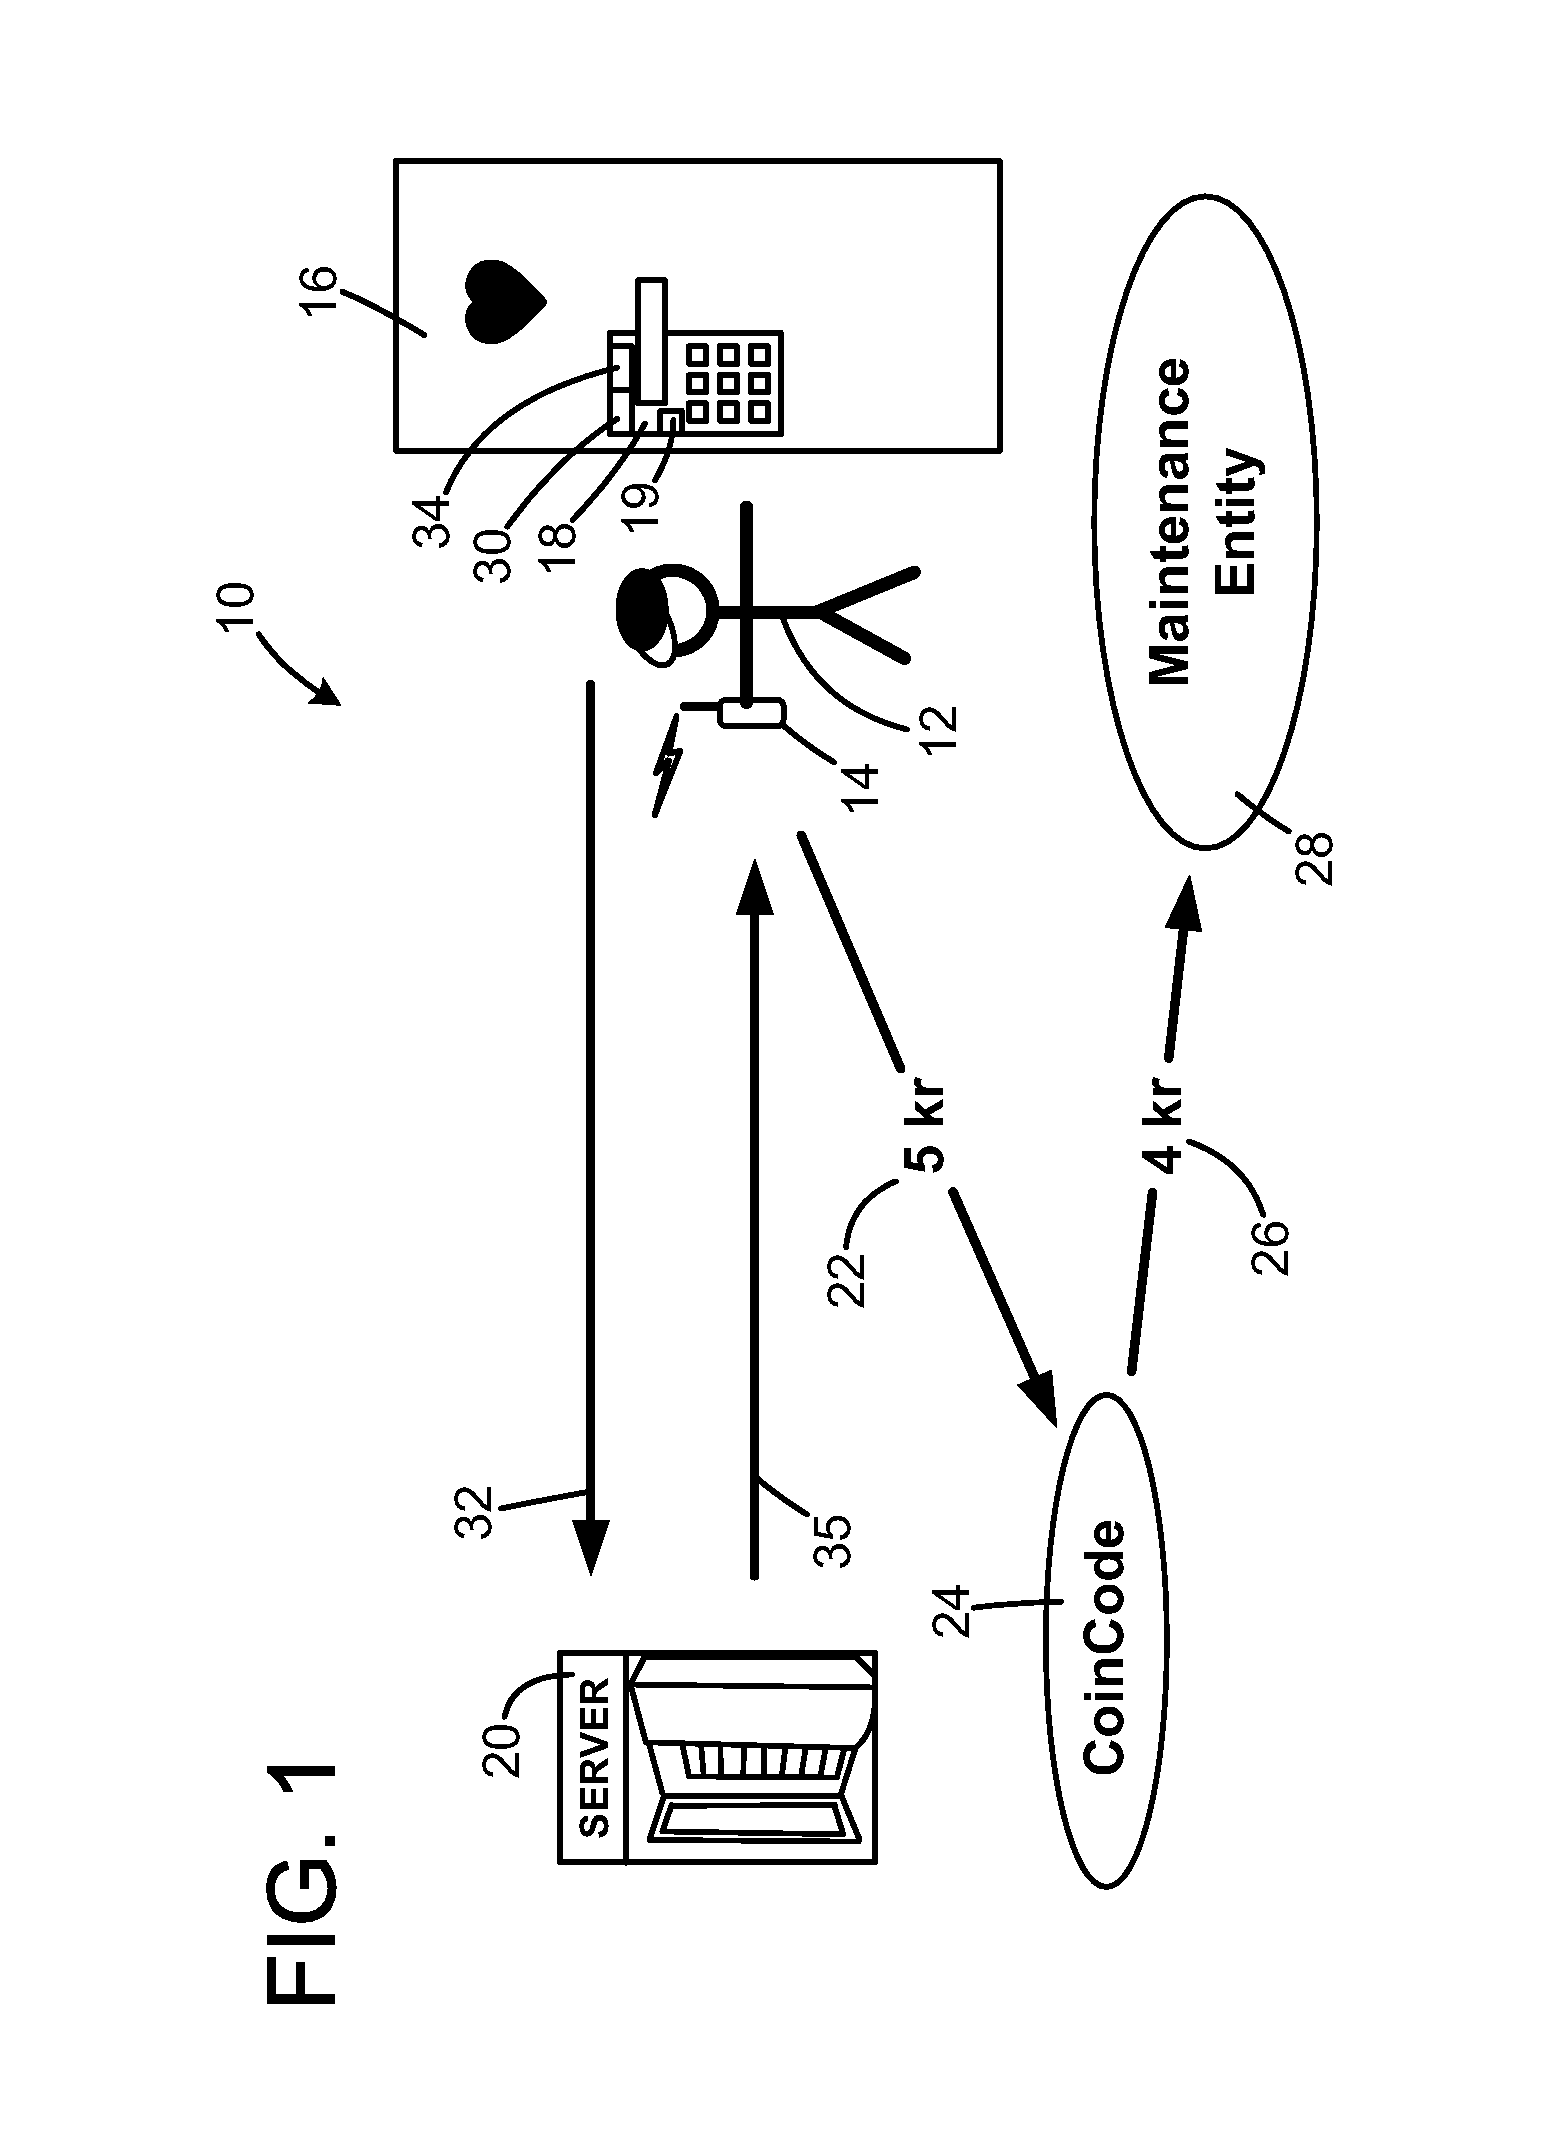 Method of gaining access to a device